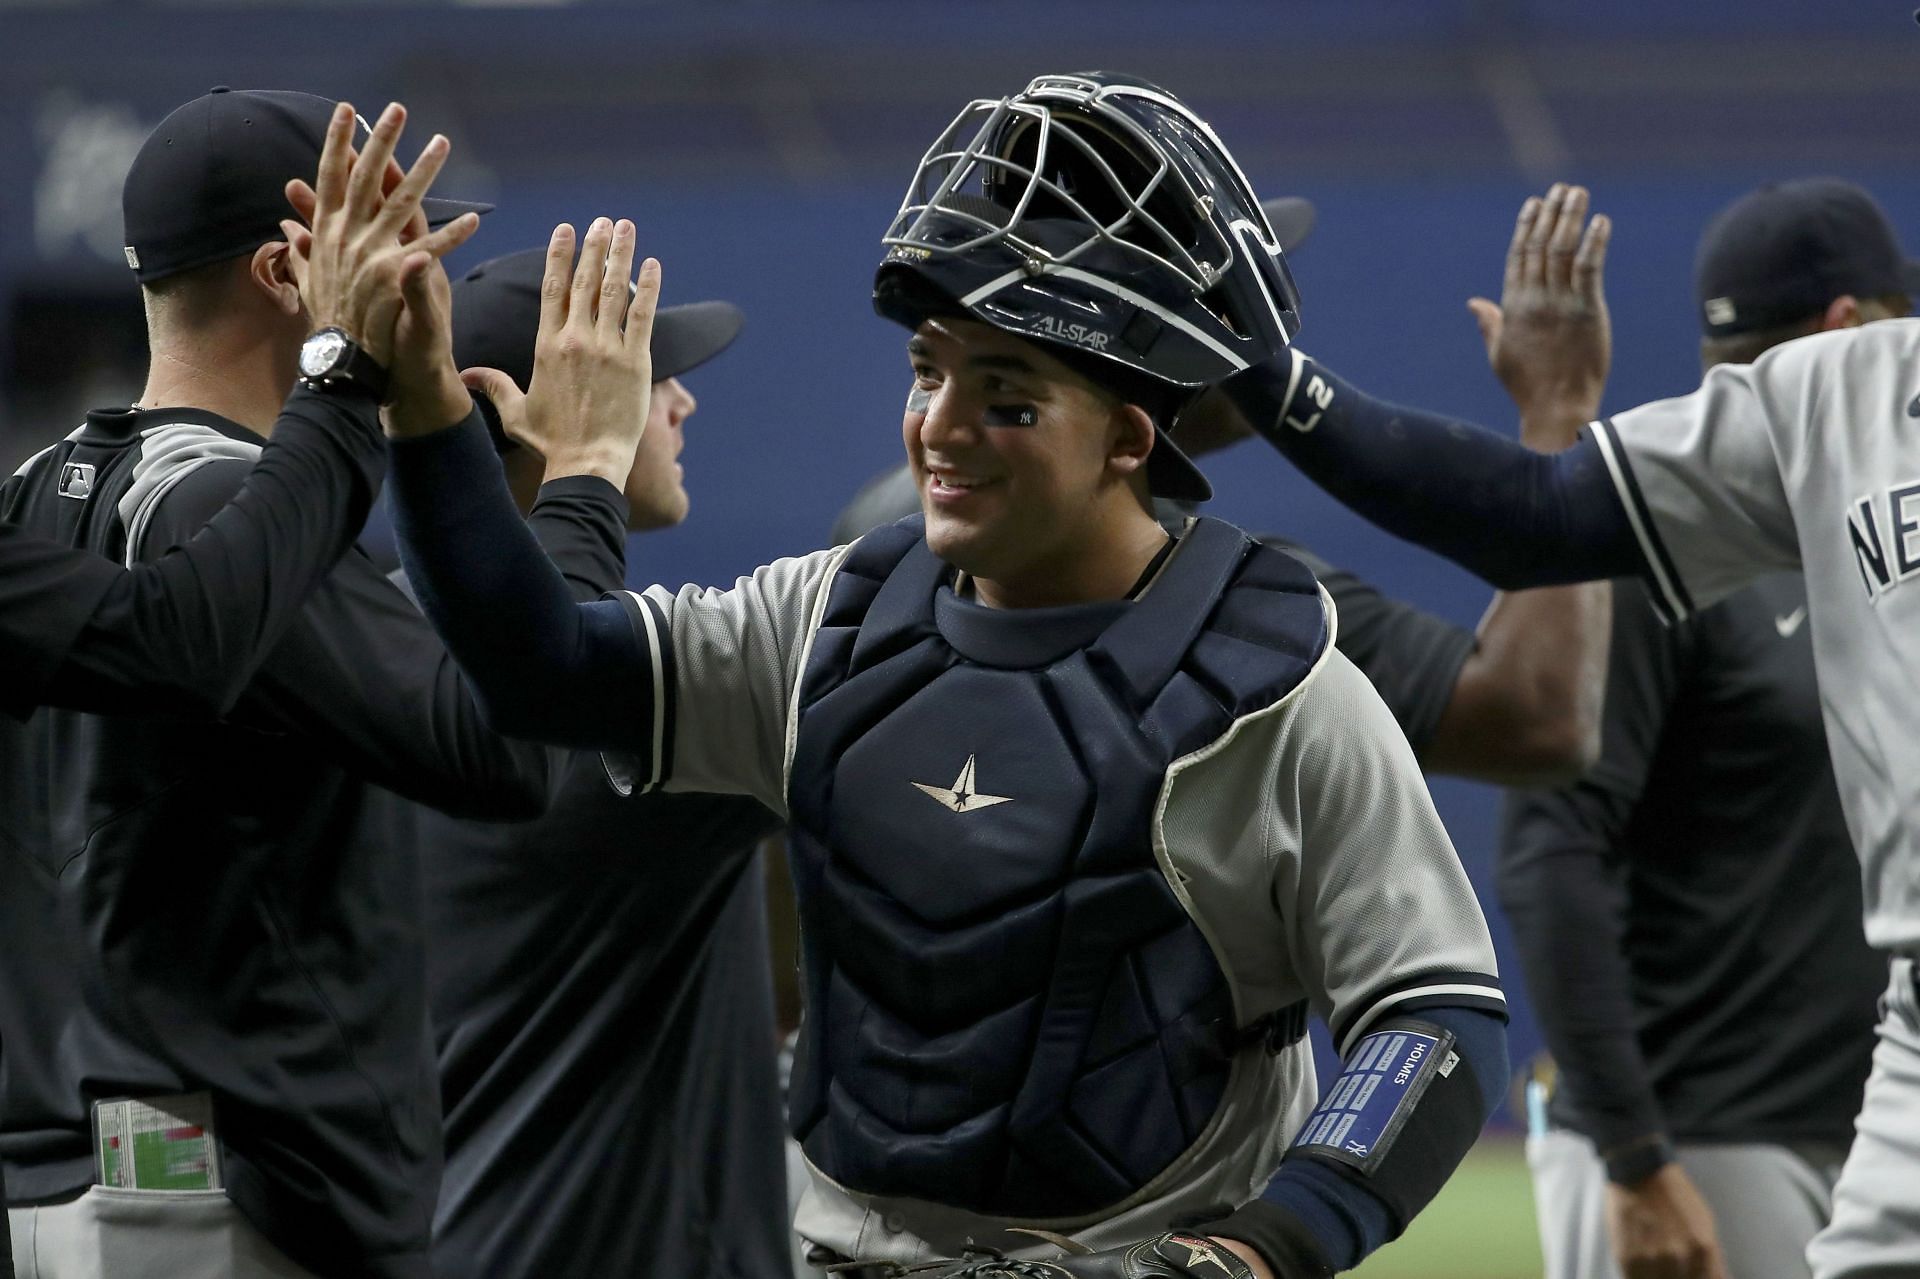 Jose Trevino proving to be Yankees' best option at catcher